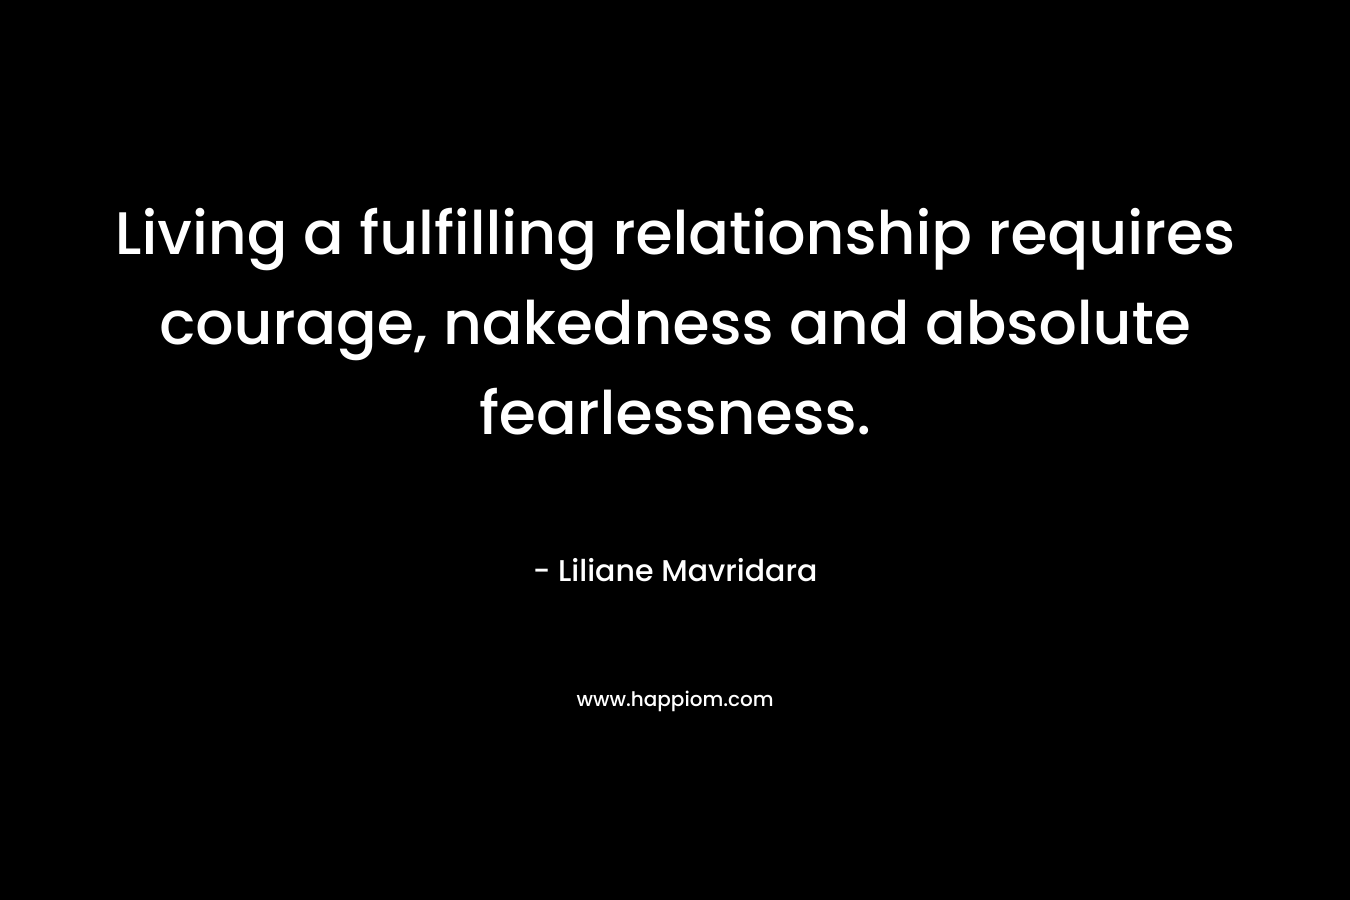 Living a fulfilling relationship requires courage, nakedness and absolute fearlessness.